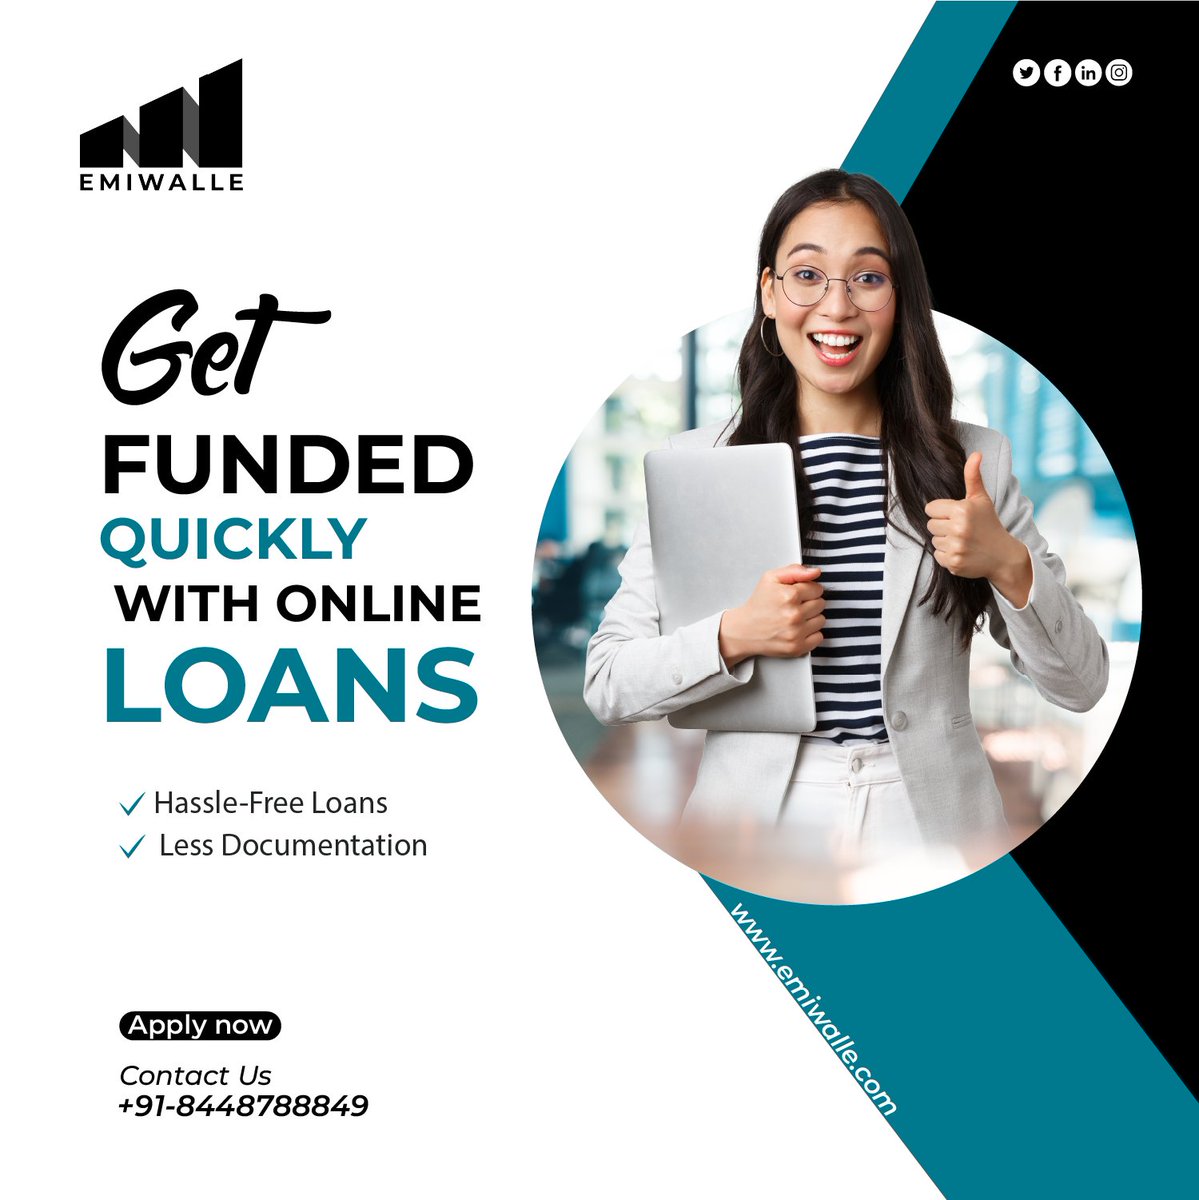 Gain access to personalized loans, tailored to your needs, whether it's a short-term boost or a personal endeavor. 

#shorttermloans #instantloan #loan #loanprovider #loanservices #emiloan #business #money #finance #shorttermbusiness #buinessloan #instantbusinesloan #onlineloan